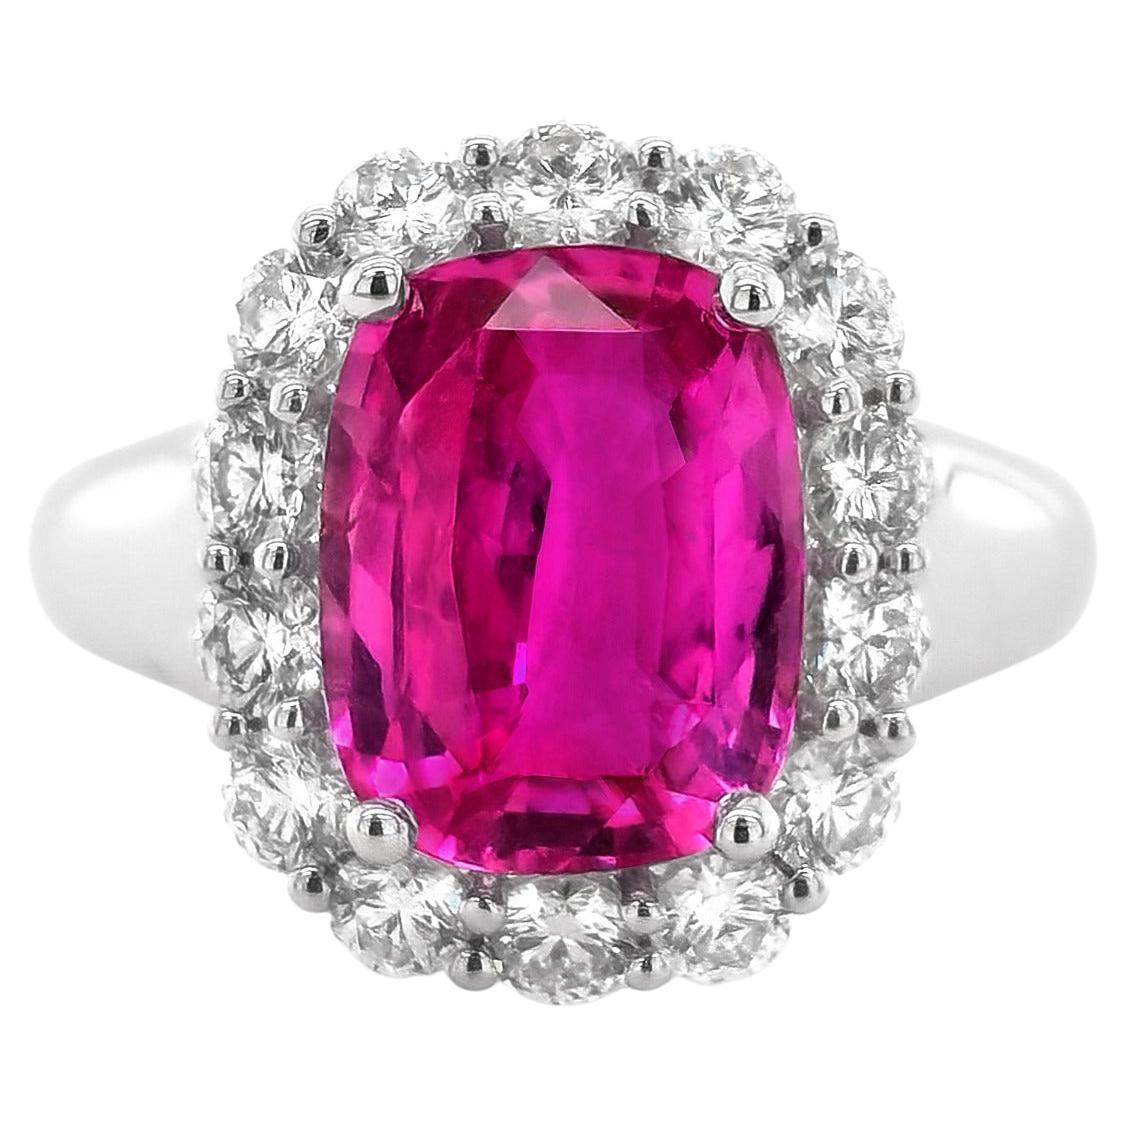 GIA Certified 4.54 Carat Madagascar Pink Sapphire Diamond 18k White Gold Ring For Sale